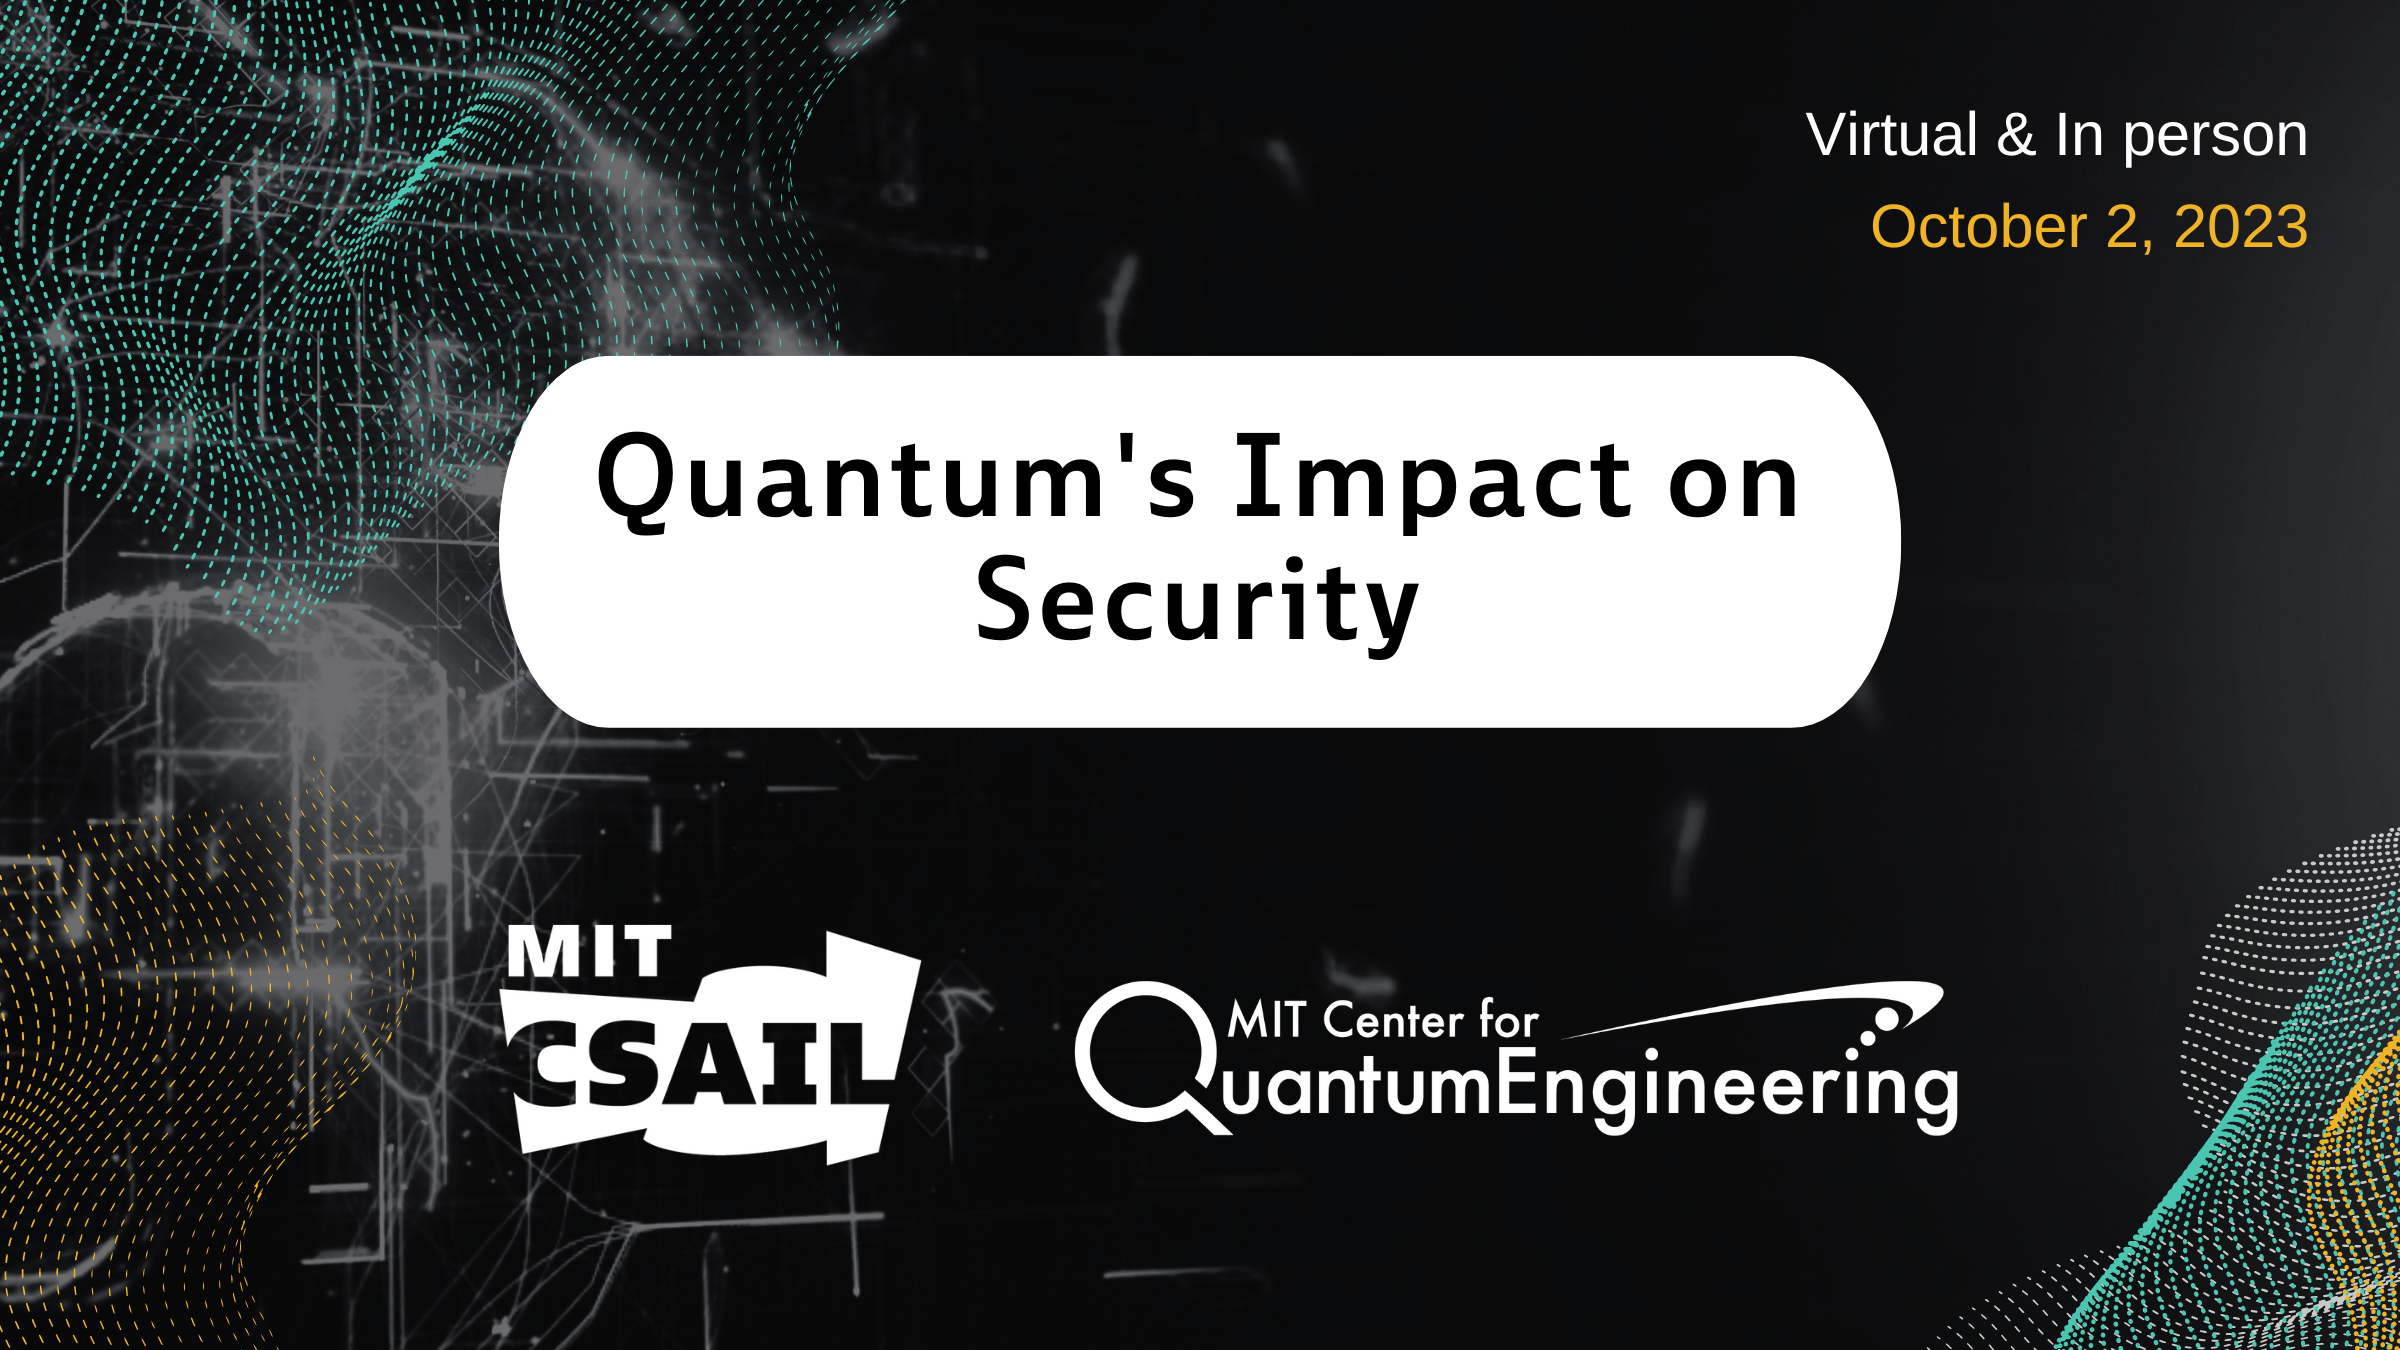 Black background with white circle and event title: Quantum's Impact on Security with the CSAIL logo and Center for Quantum Engineering logo both in white below the title. 